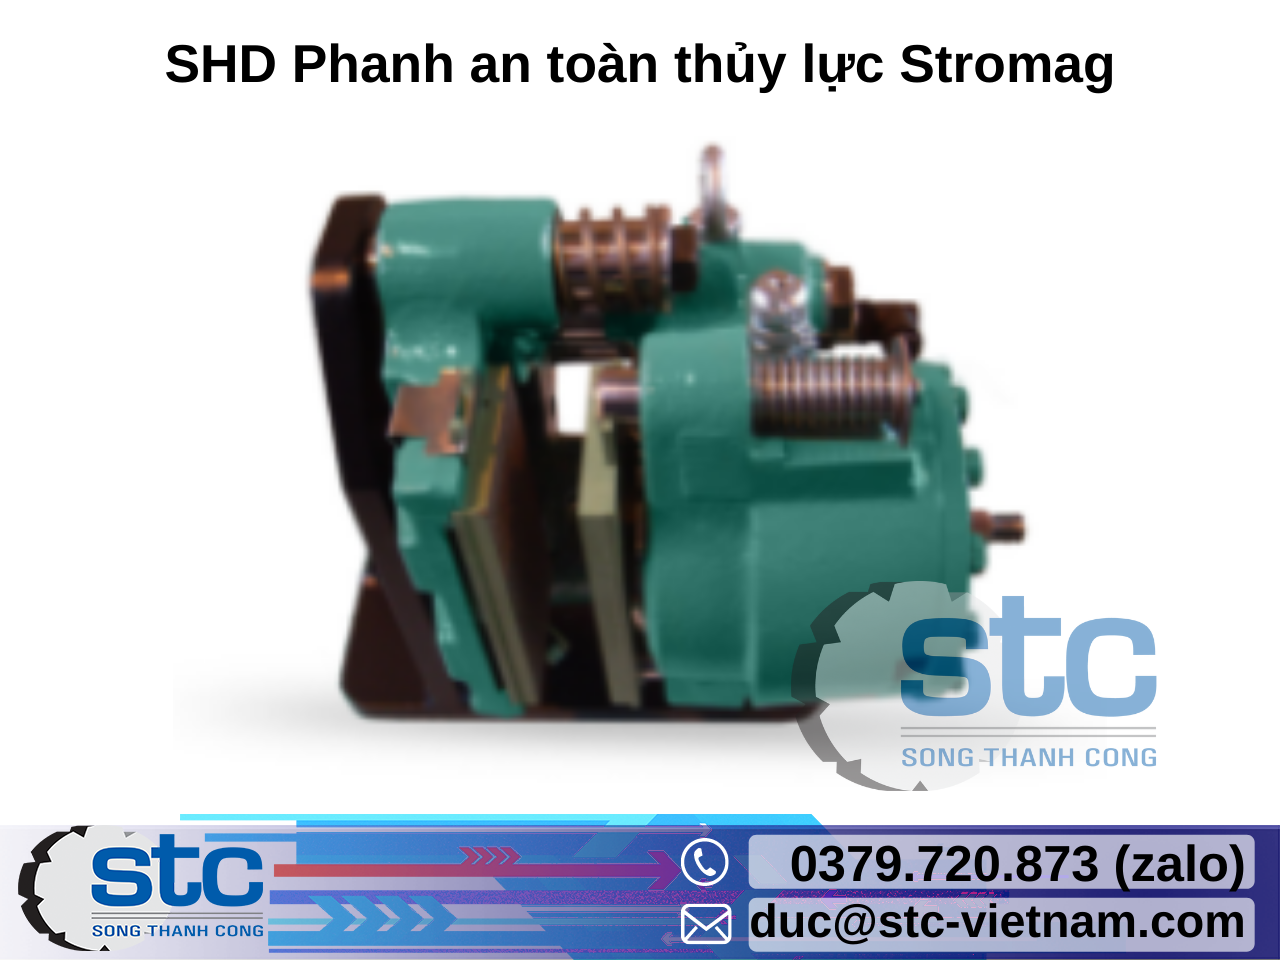 shd-phanh-an-toan-thuy-luc-stromag.png